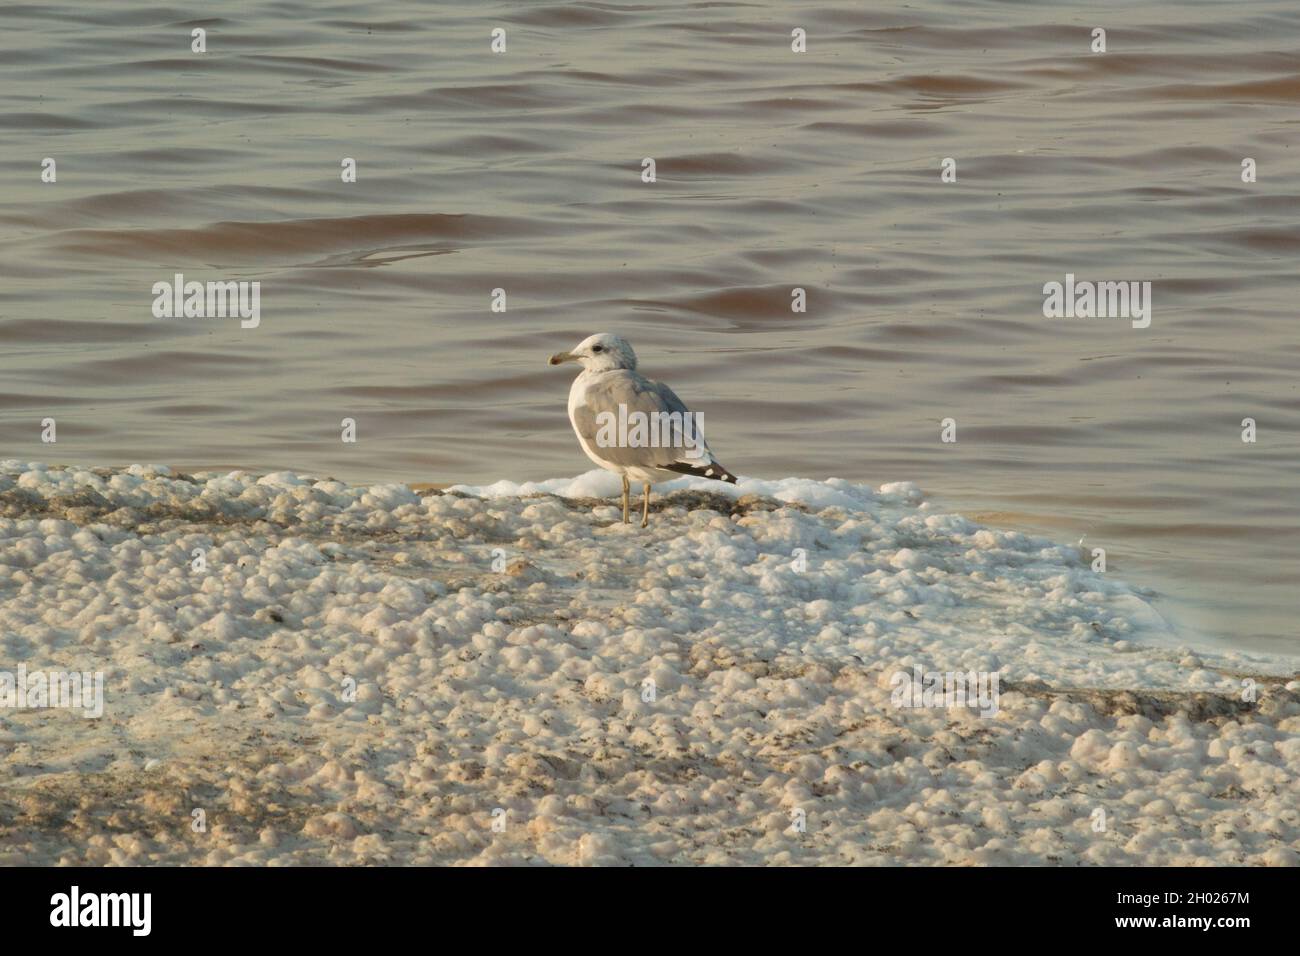 Many gulls sitting and standing on salt islands at dusk in pond A15 at Alviso Marina County Park, part of the Don Edwards National Wildlife Refuge Stock Photo